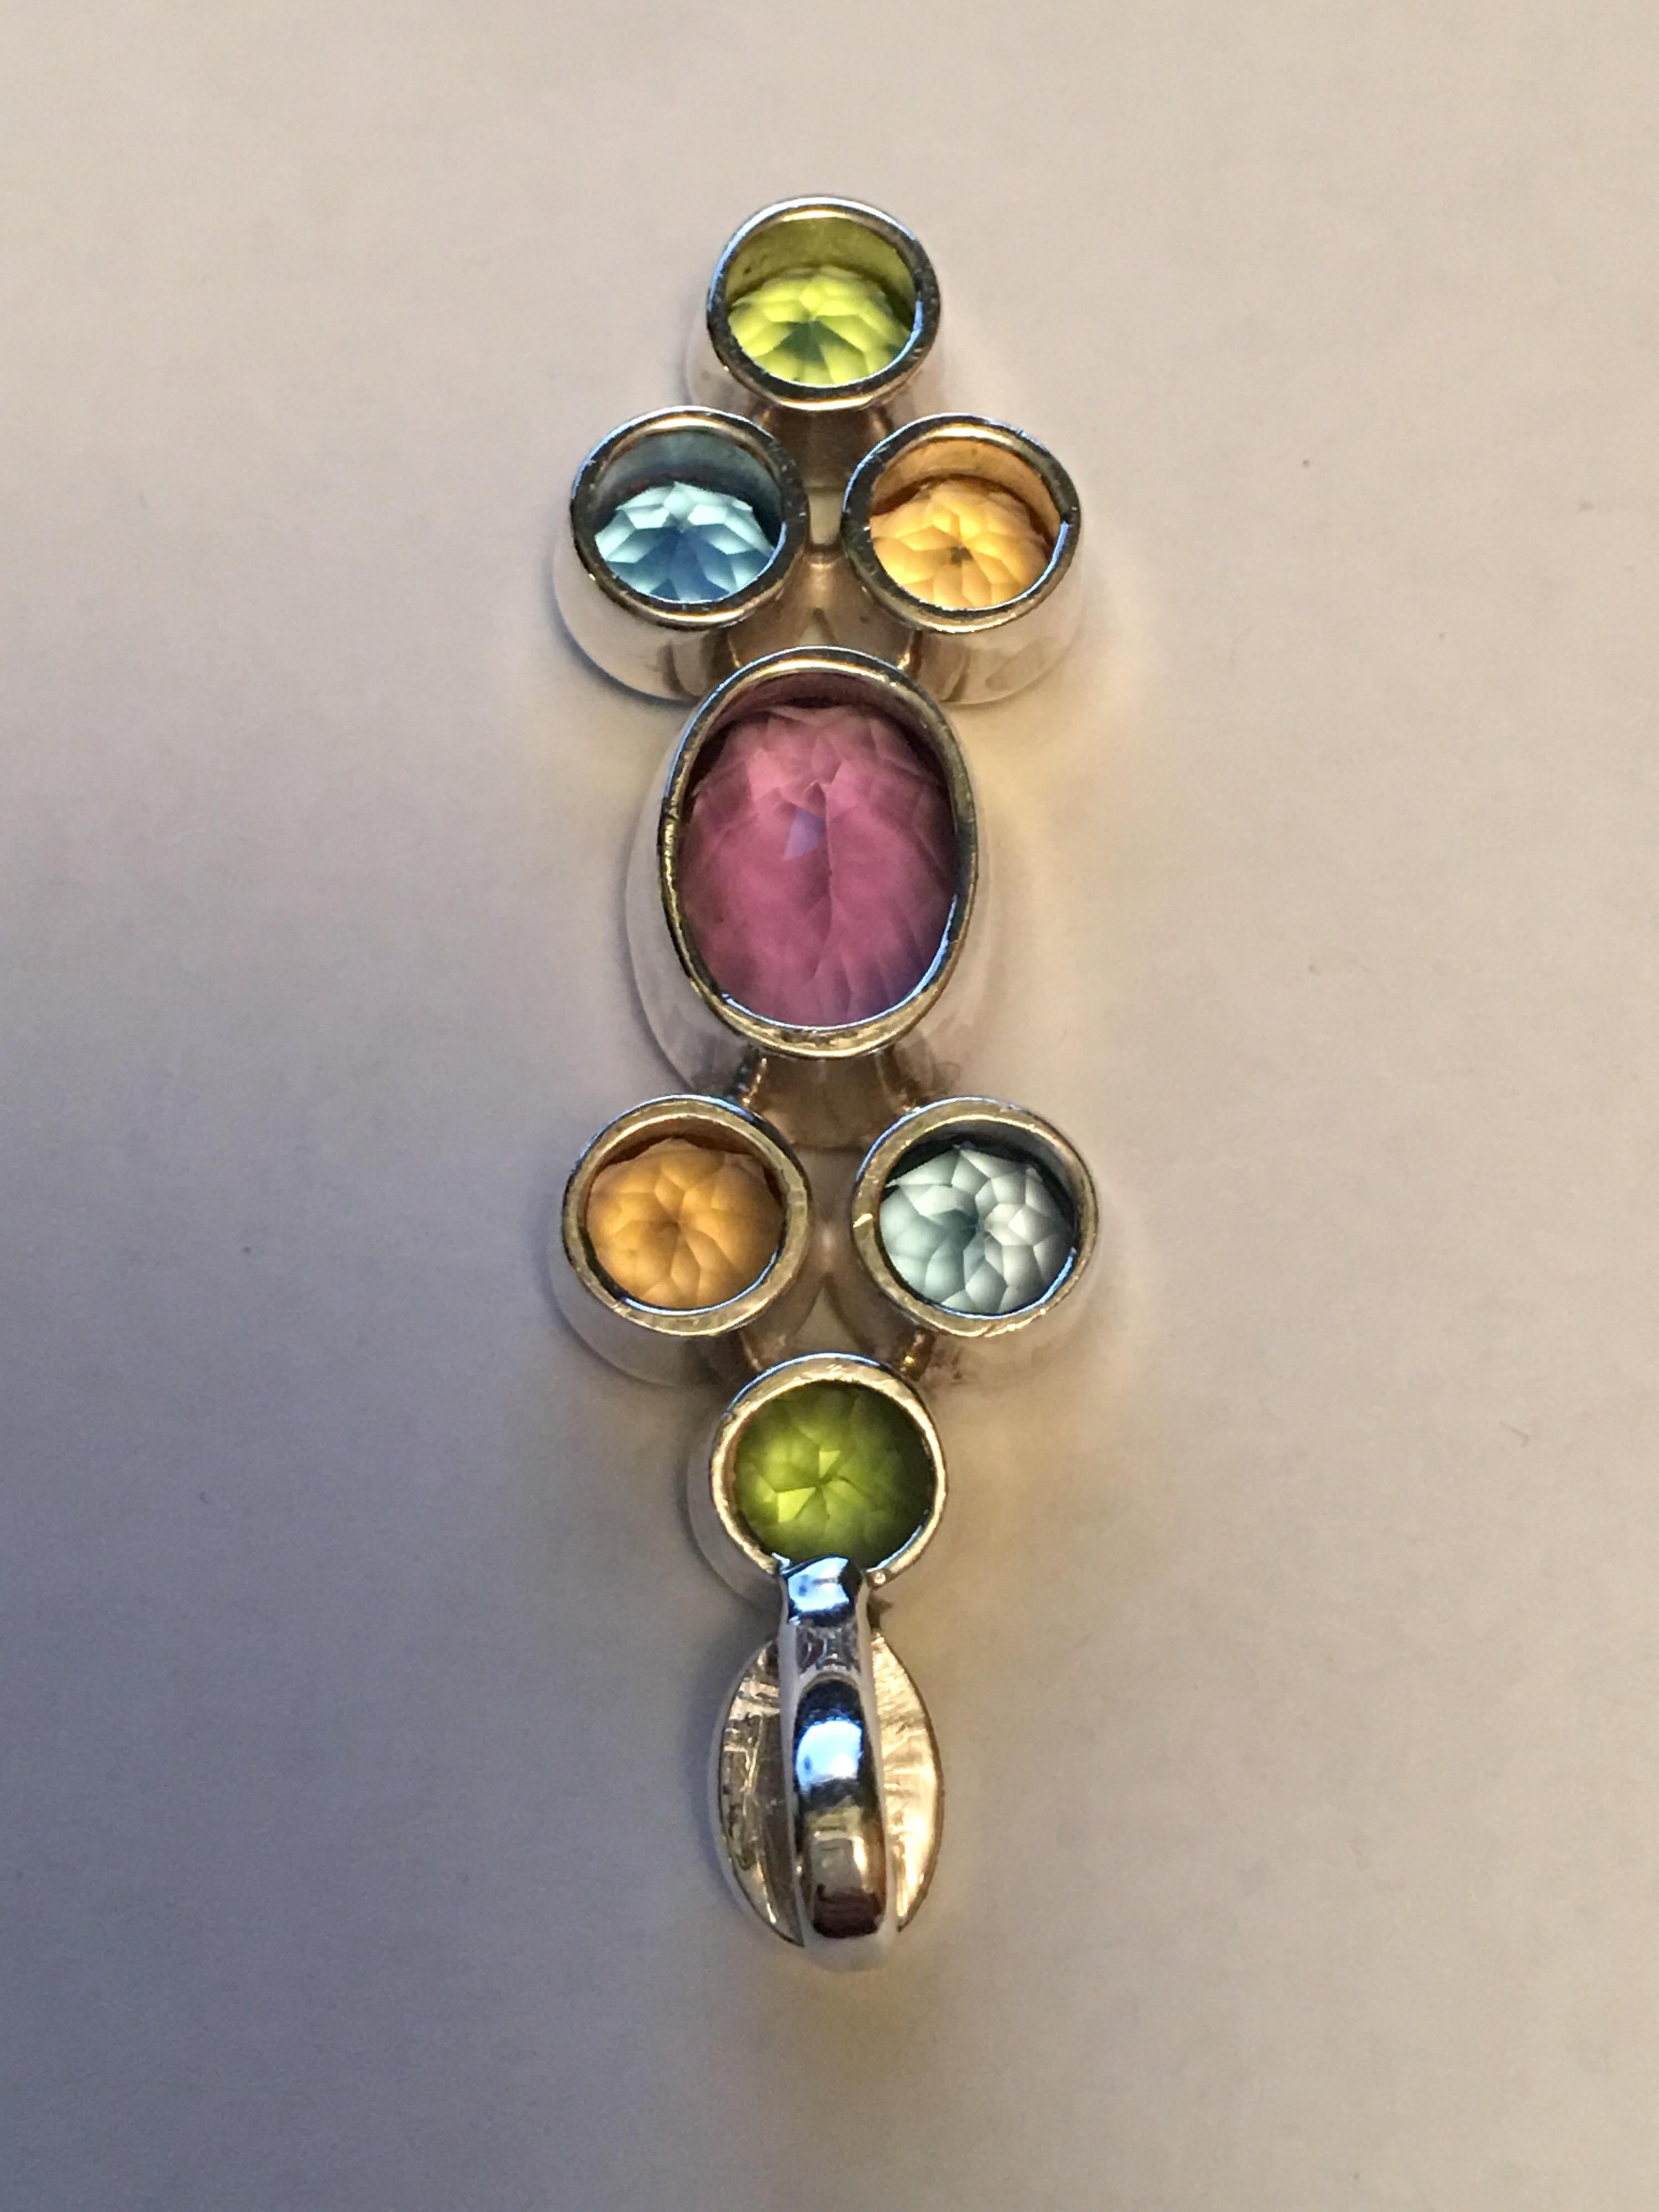 Oval Amethyst 10 MM X 14 MM Round Peridot, Citrine and Blue topaz all measure 7MM.
All stones are hand cut and Polished stones.
The Pendant is one of a kind and hand crafted.
Pendant weigh 11.07 gram.
One can wear this pendant with silver chain or